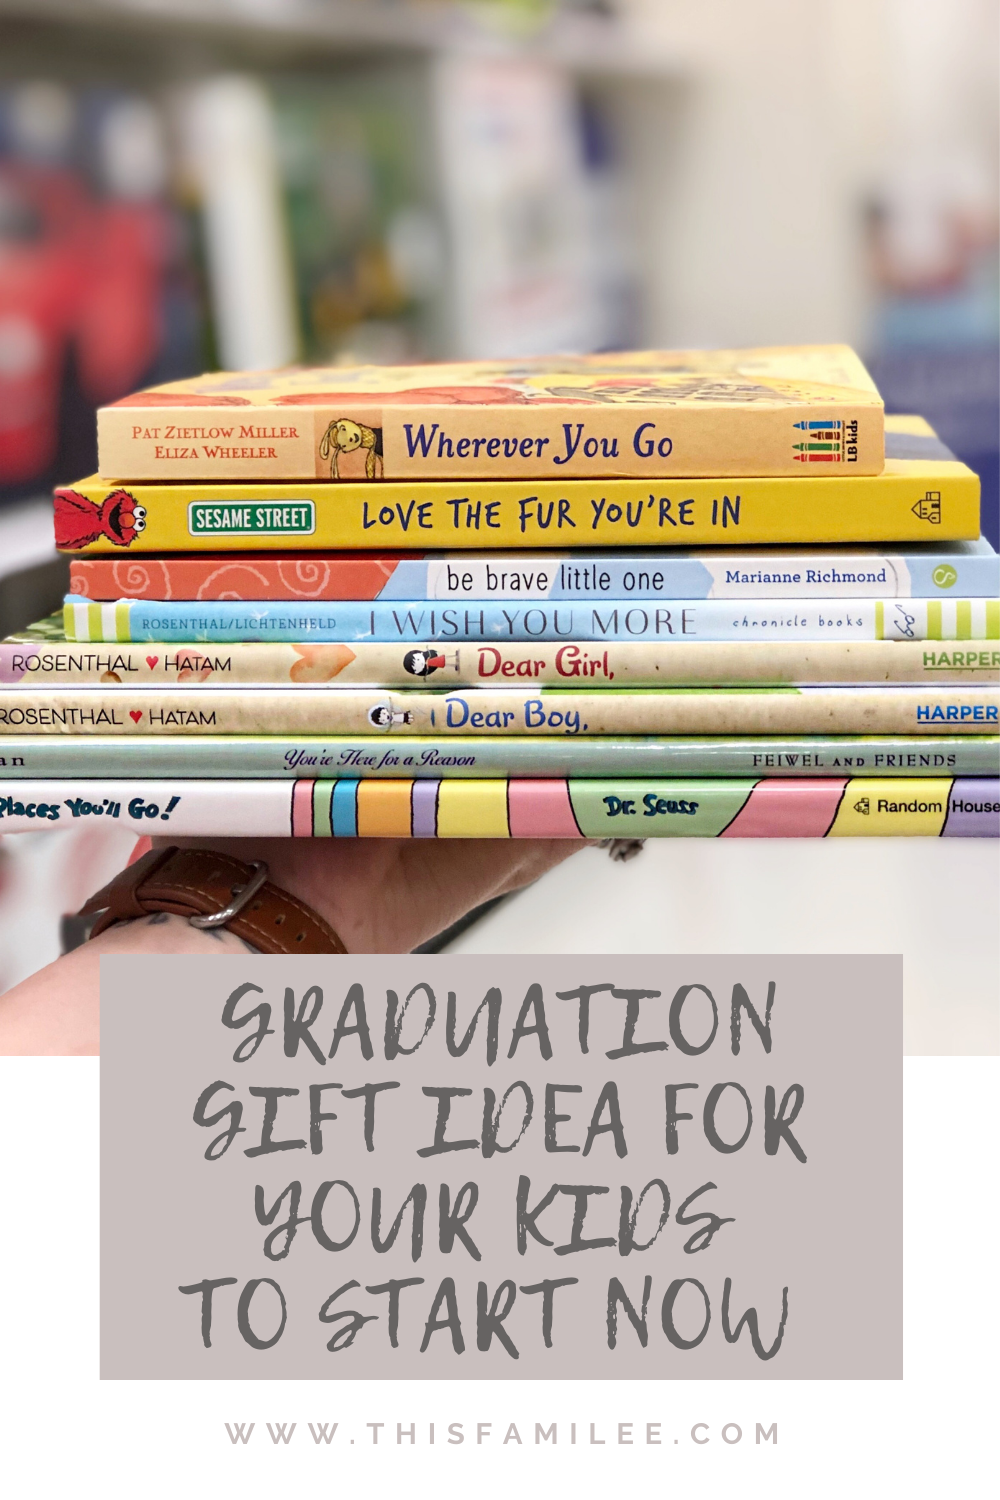 Graduation Gift Idea to Start Now | www.thisfamilee.com